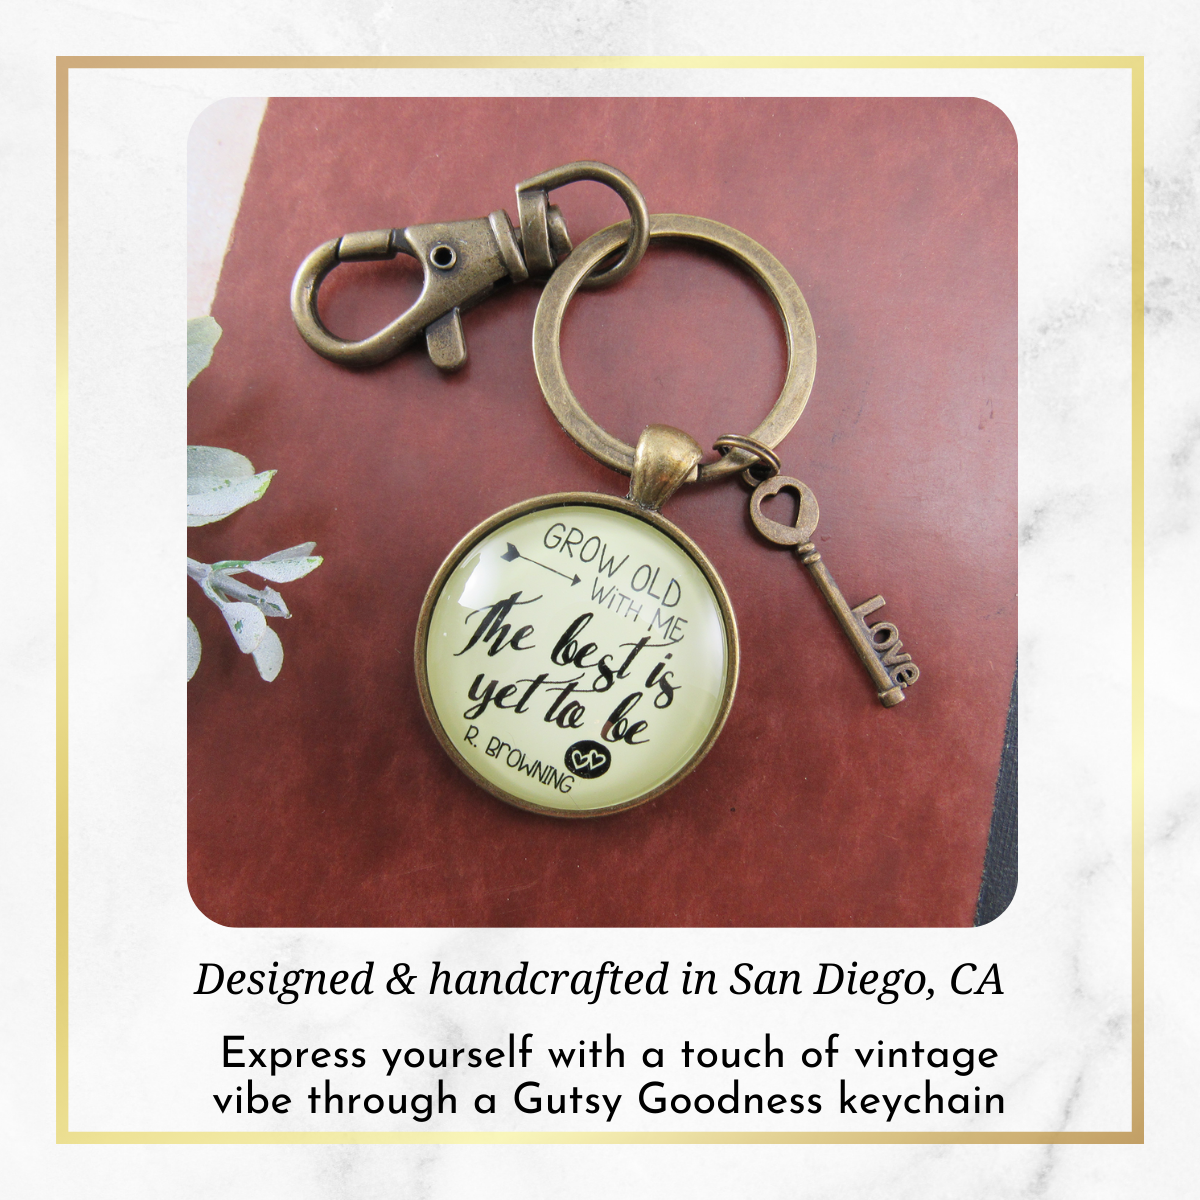 Couples Jewelry Grow Old With Me Keychain Best Yet To Be Men's Gift Style Key Chain - Gutsy Goodness Handmade Jewelry;Couples Jewelry Grow Old With Me Keychain Best Yet To Be Men's Gift Style Key Chain - Gutsy Goodness Handmade Jewelry Gifts